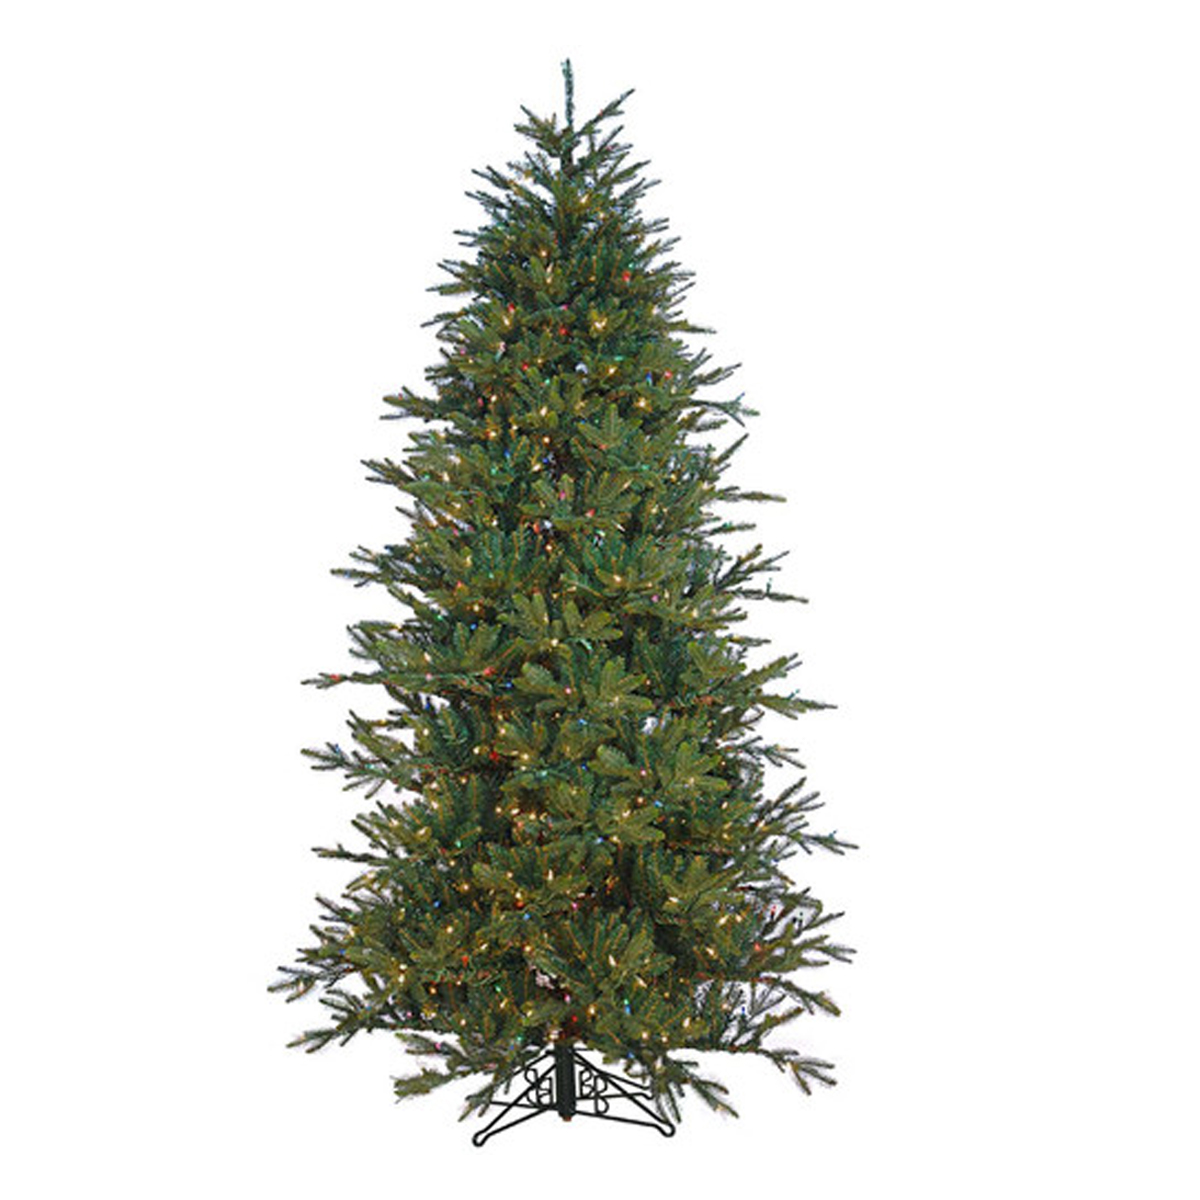 Alaskan Deluxe Christmas Tree - Slim-Style - Clear Incandescent Lightbulbs - One-Plug Power Supply - 9ft Tall